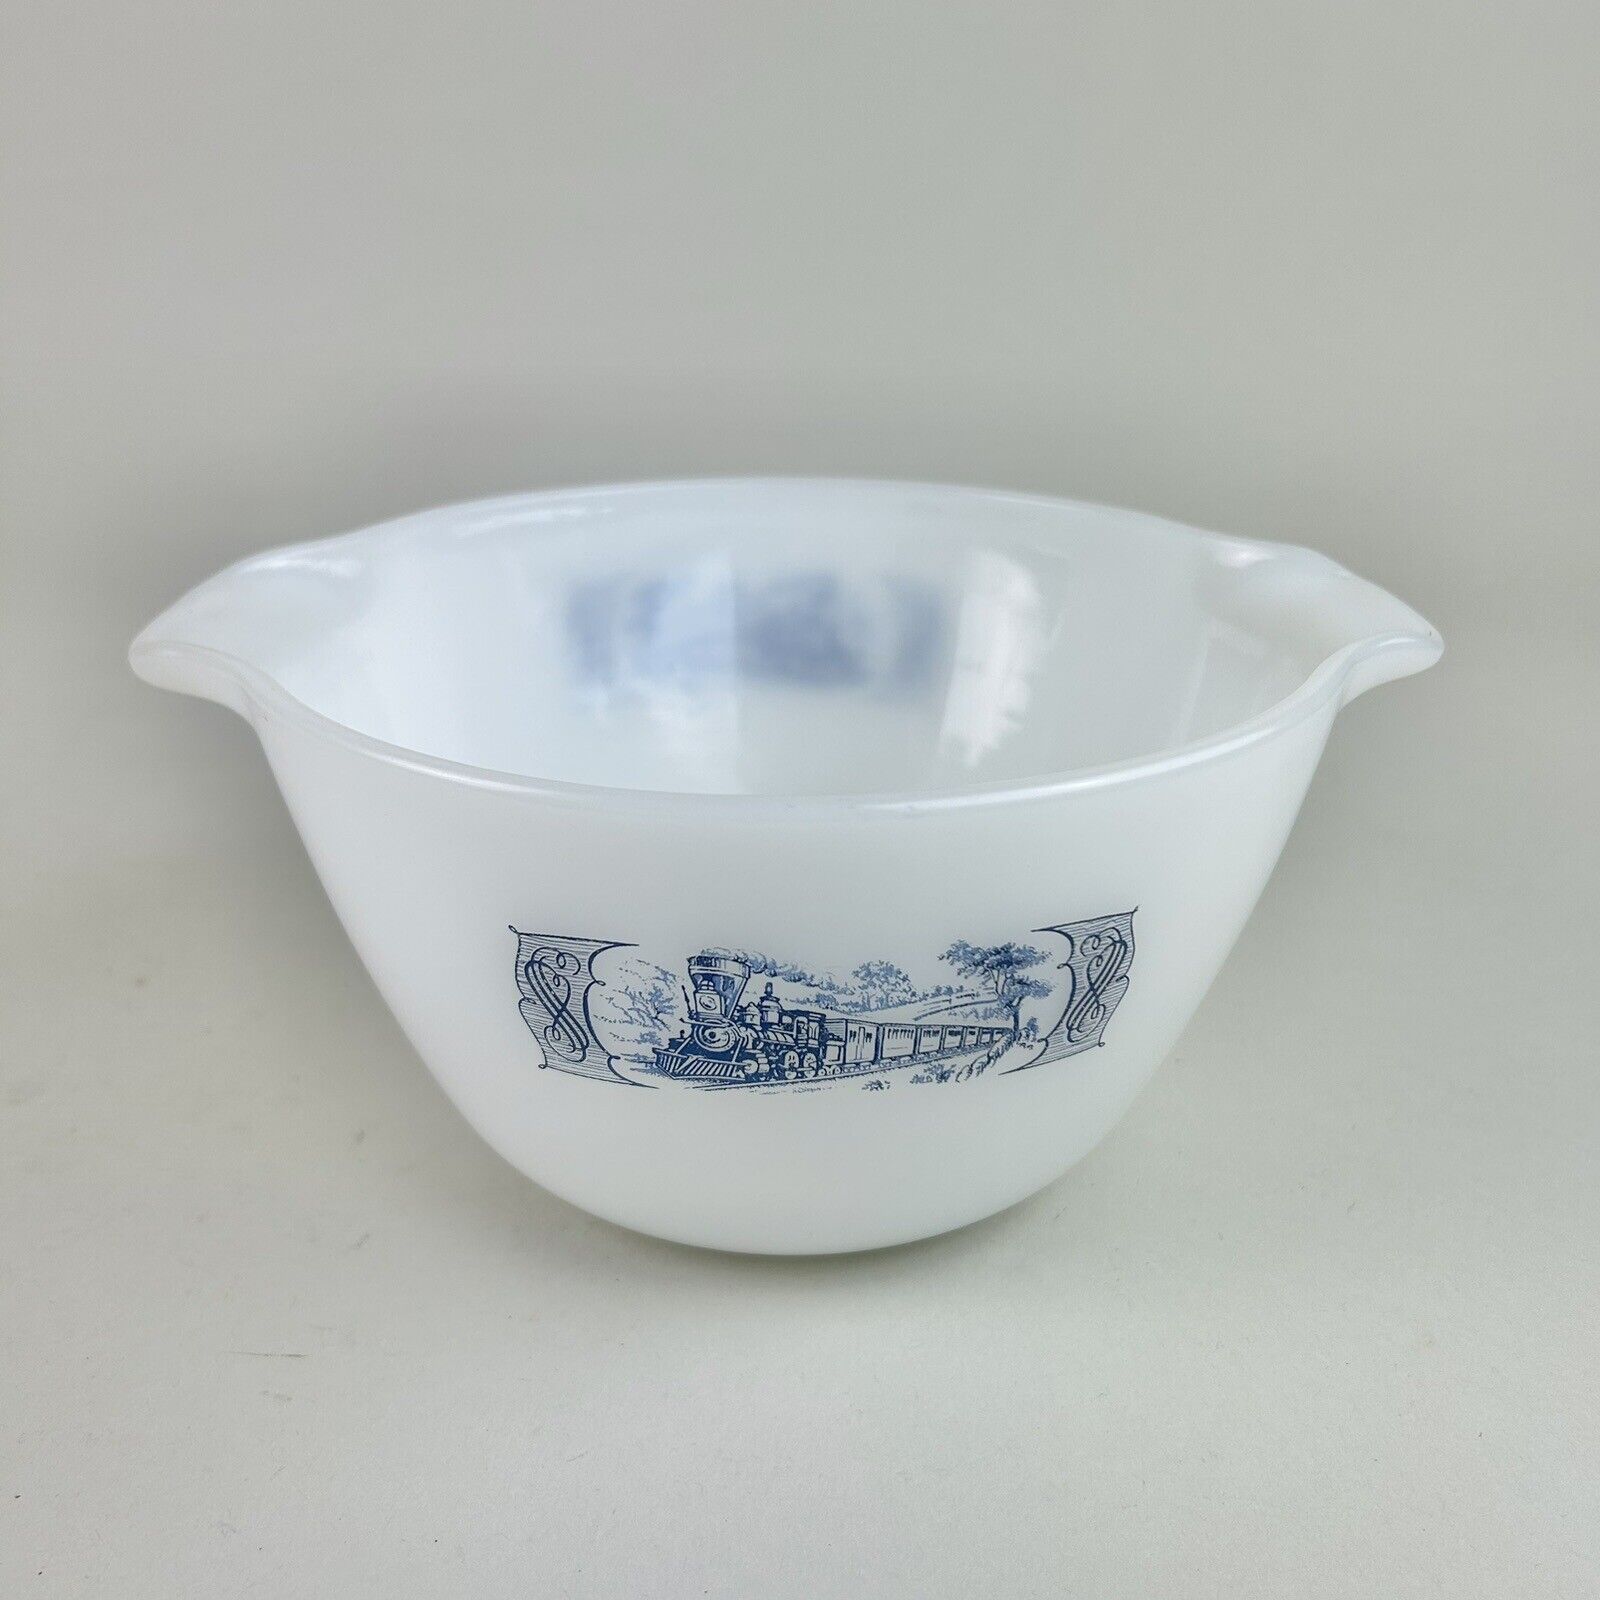 Vintage Currier and Ives Nesting Mixing Bowl - White Blue Train 7.5” Diameter